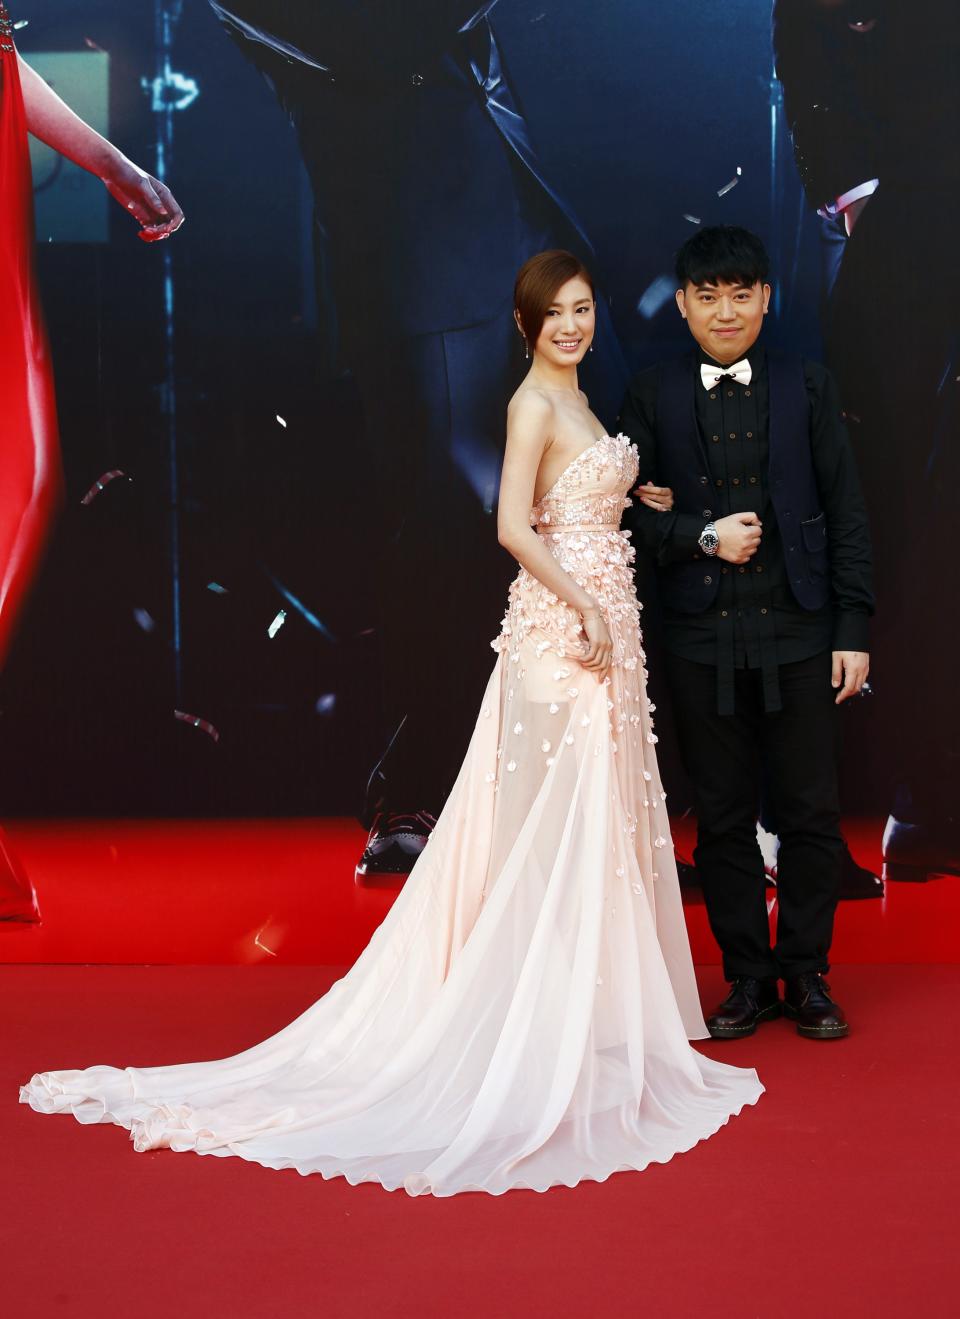 Angel Chiang, nominated for Best New Performer for her role in "A Secret Between Us", poses on the red carpet with director Patrick Kong during the 33rd Hong Kong Film Awards in Hong Kong April 13, 2014. REUTERS/Tyrone Siu (CHINA - Tags: ENTERTAINMENT)